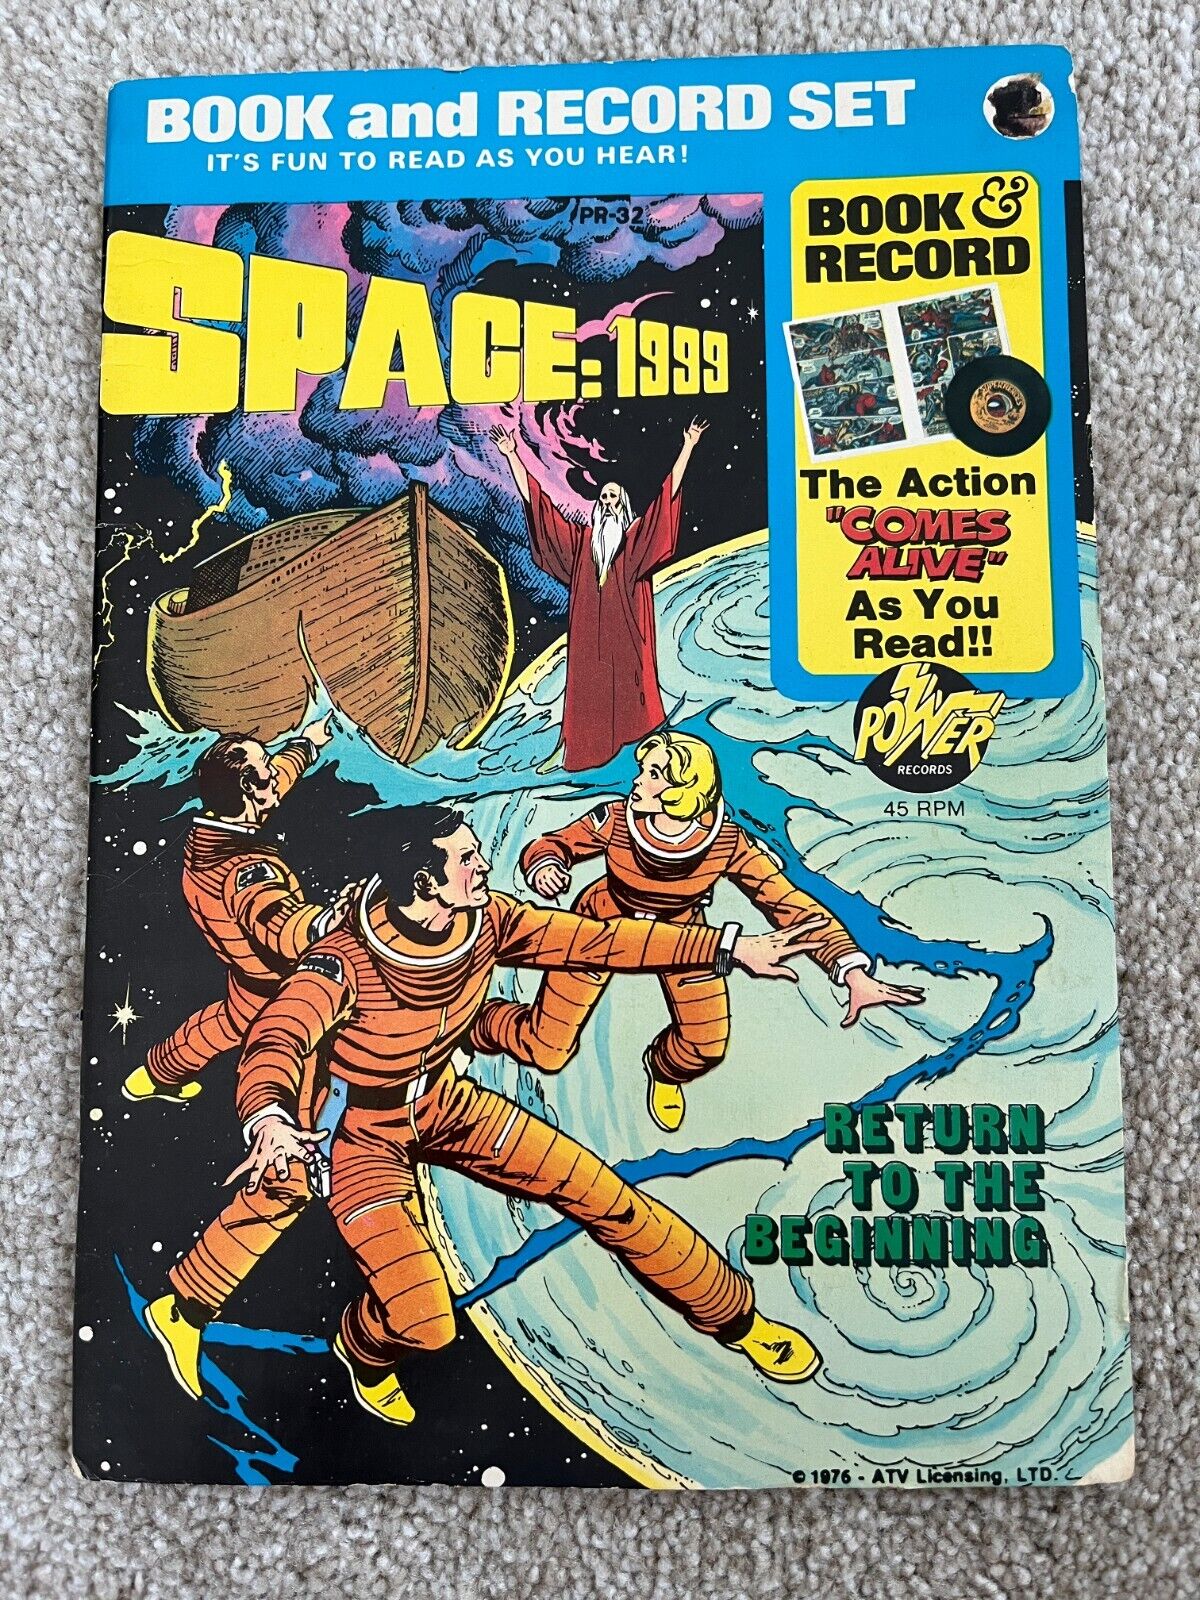 Space: 1999 Book and Record Set 45 RPM - 1976 AVT Licensing, LTD Power Records 